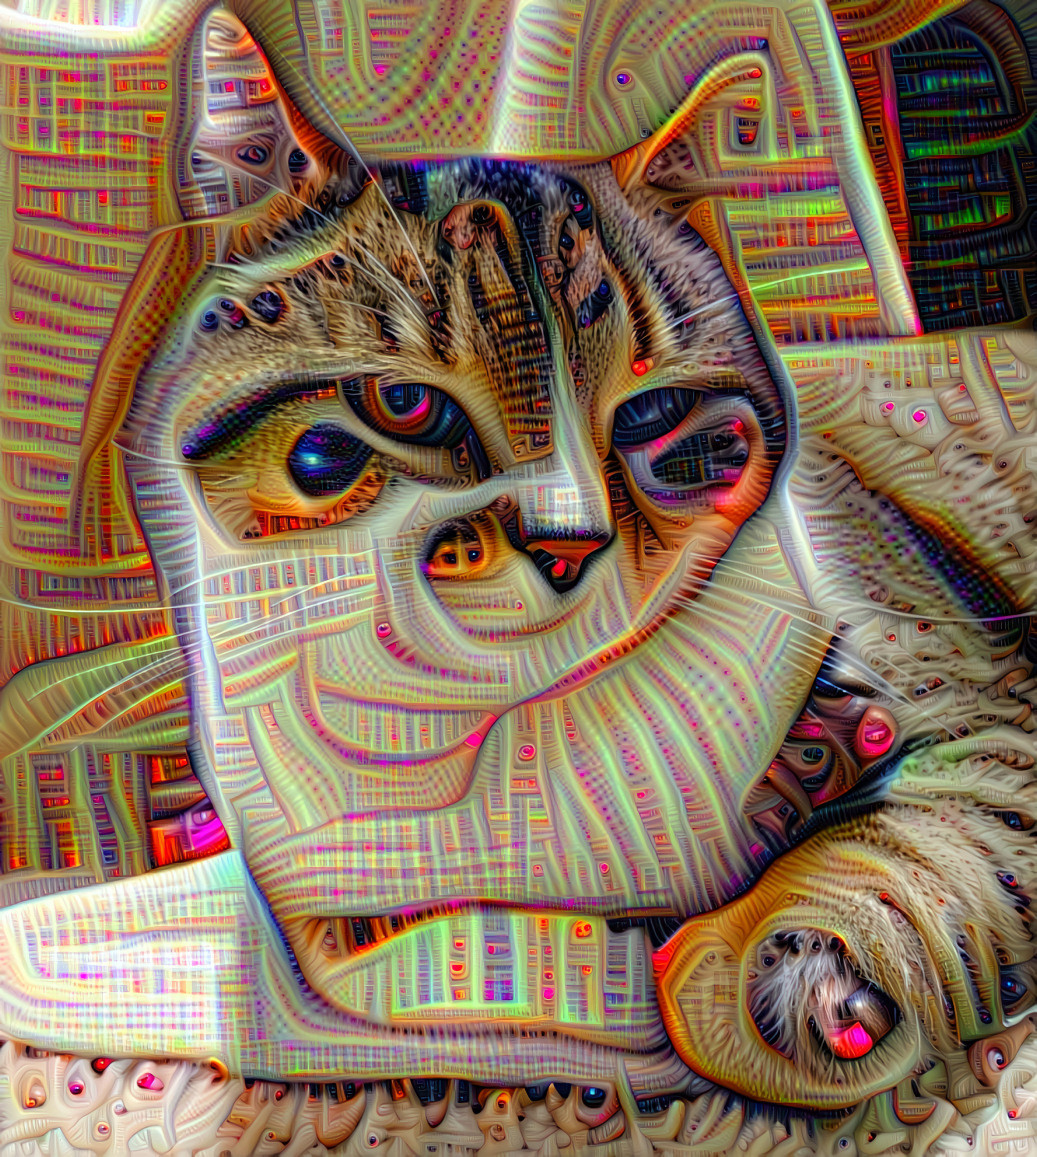 I still don't know how to use the deep dream very well, lol.